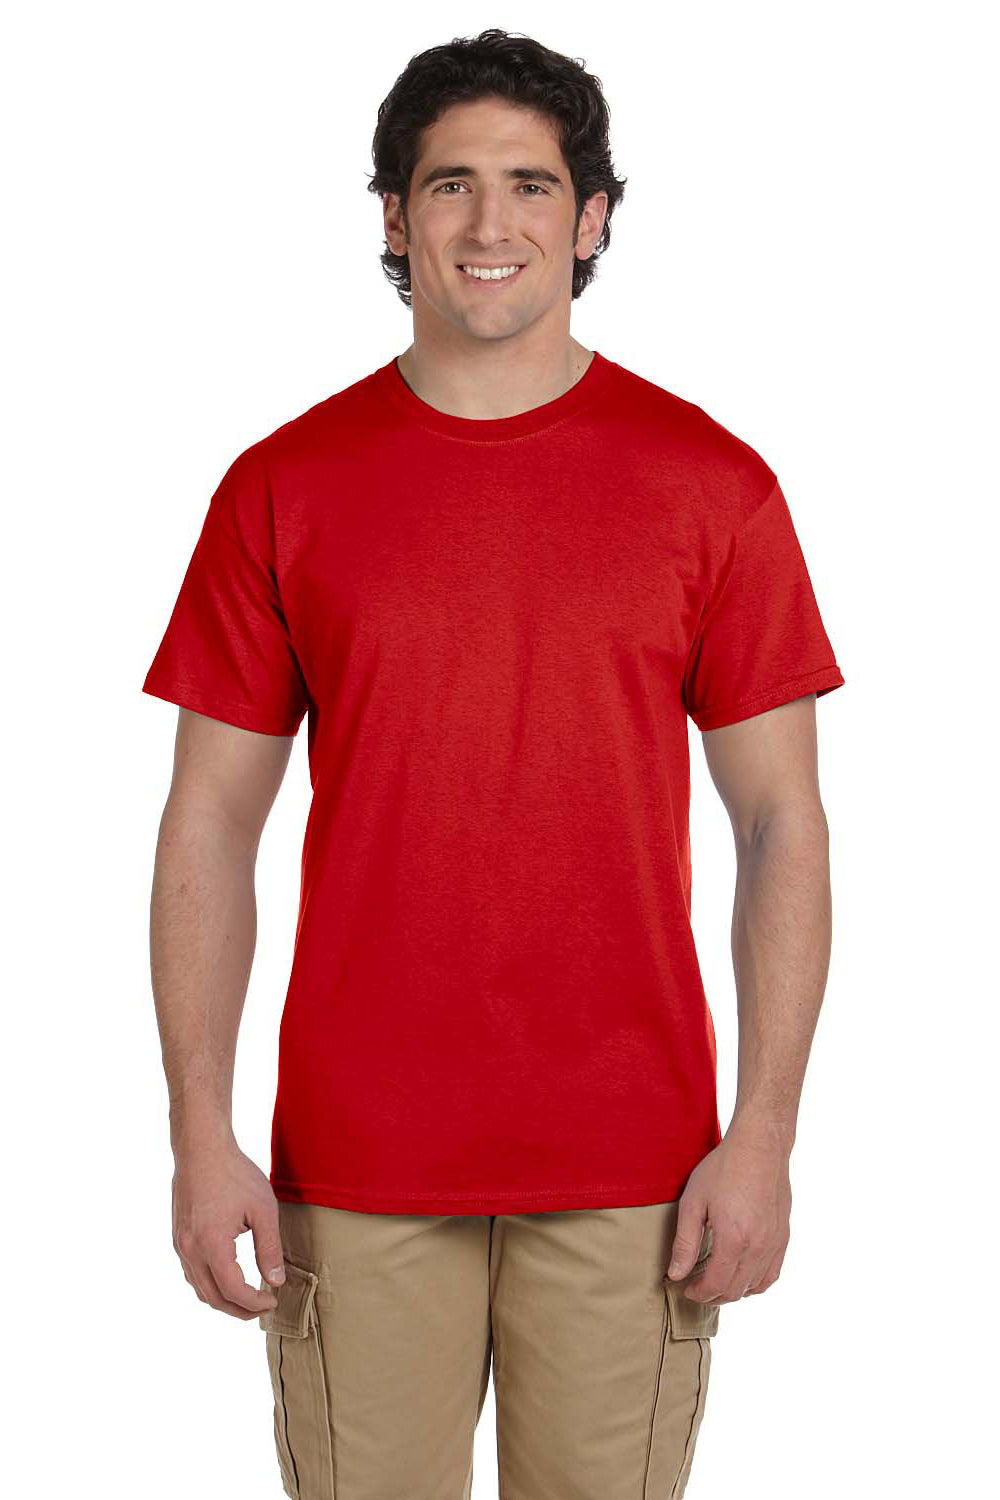 Fruit Of The Loom 3931 Mens HD Jersey Short Sleeve Crewneck T-Shirt Red Front